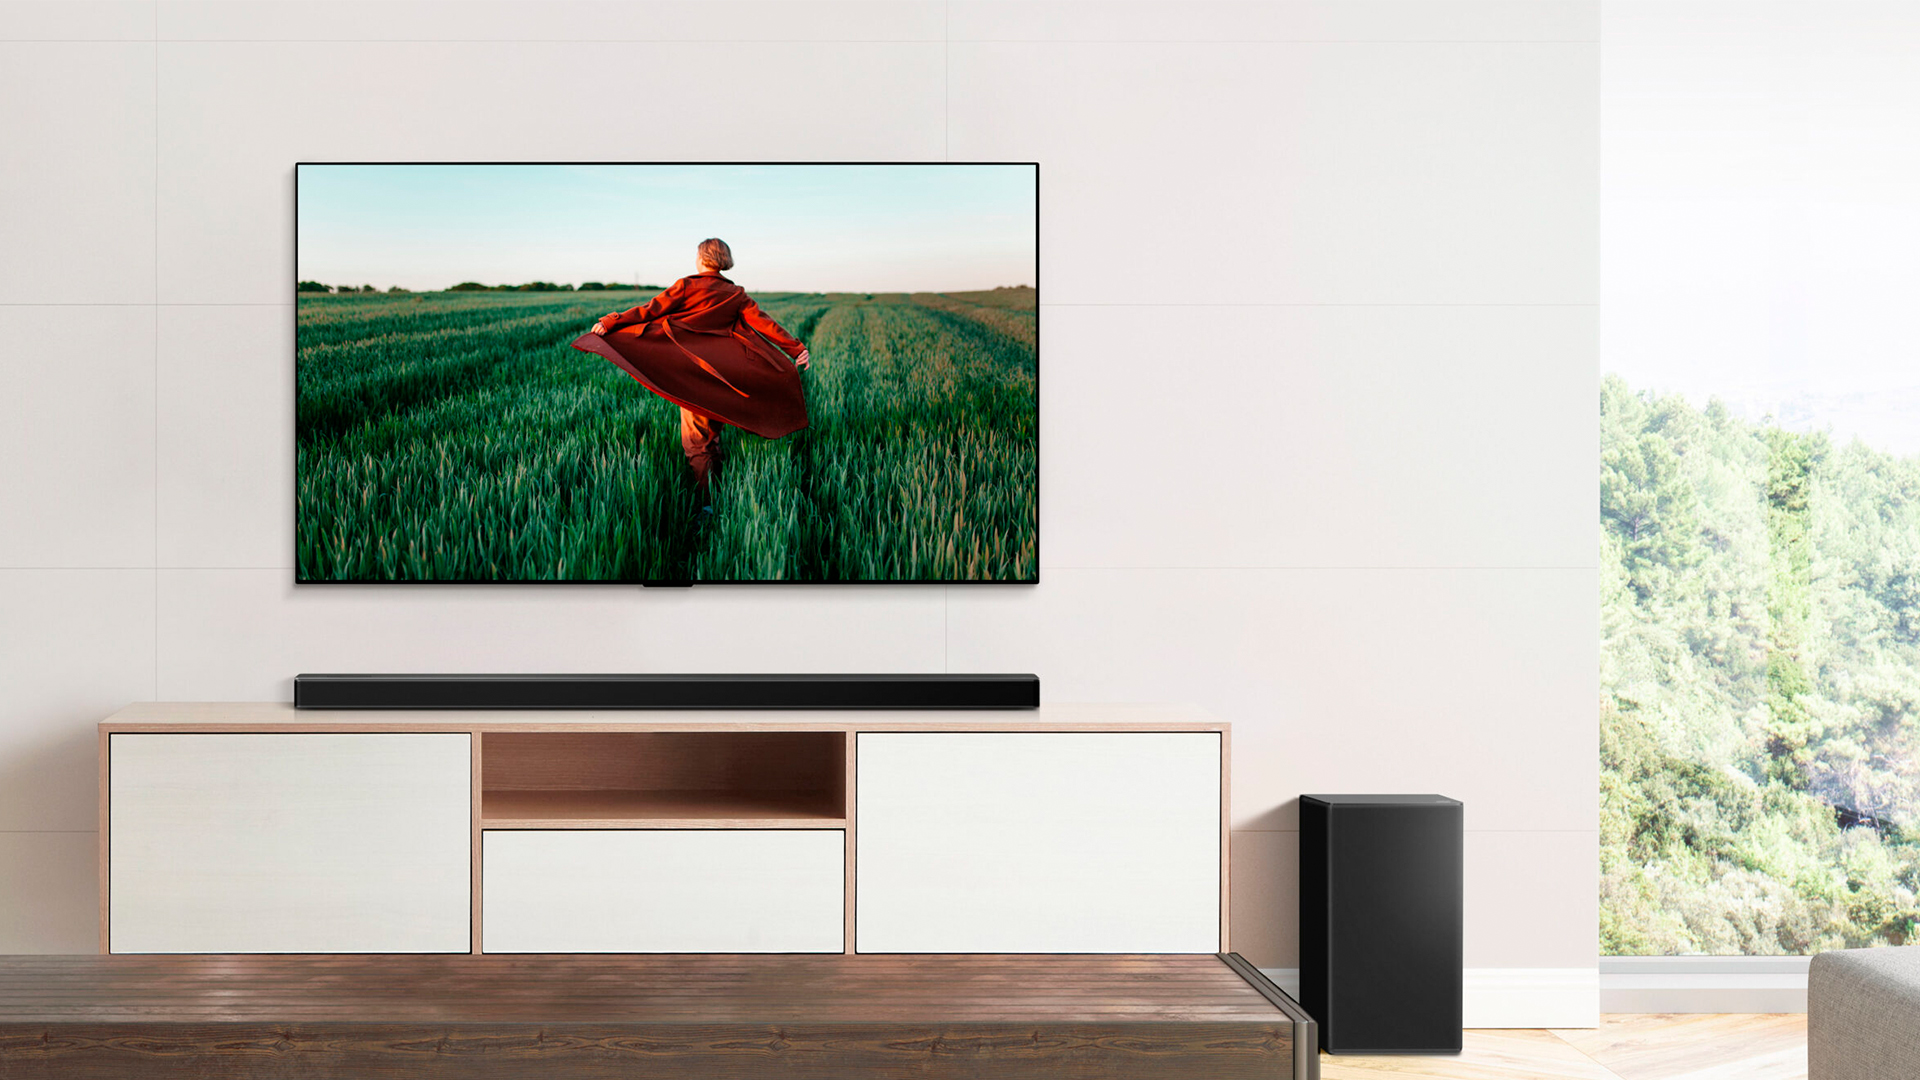 LG launches 2021 soundbar lineup with AirPlay 2 and Siri support - 9to5Mac